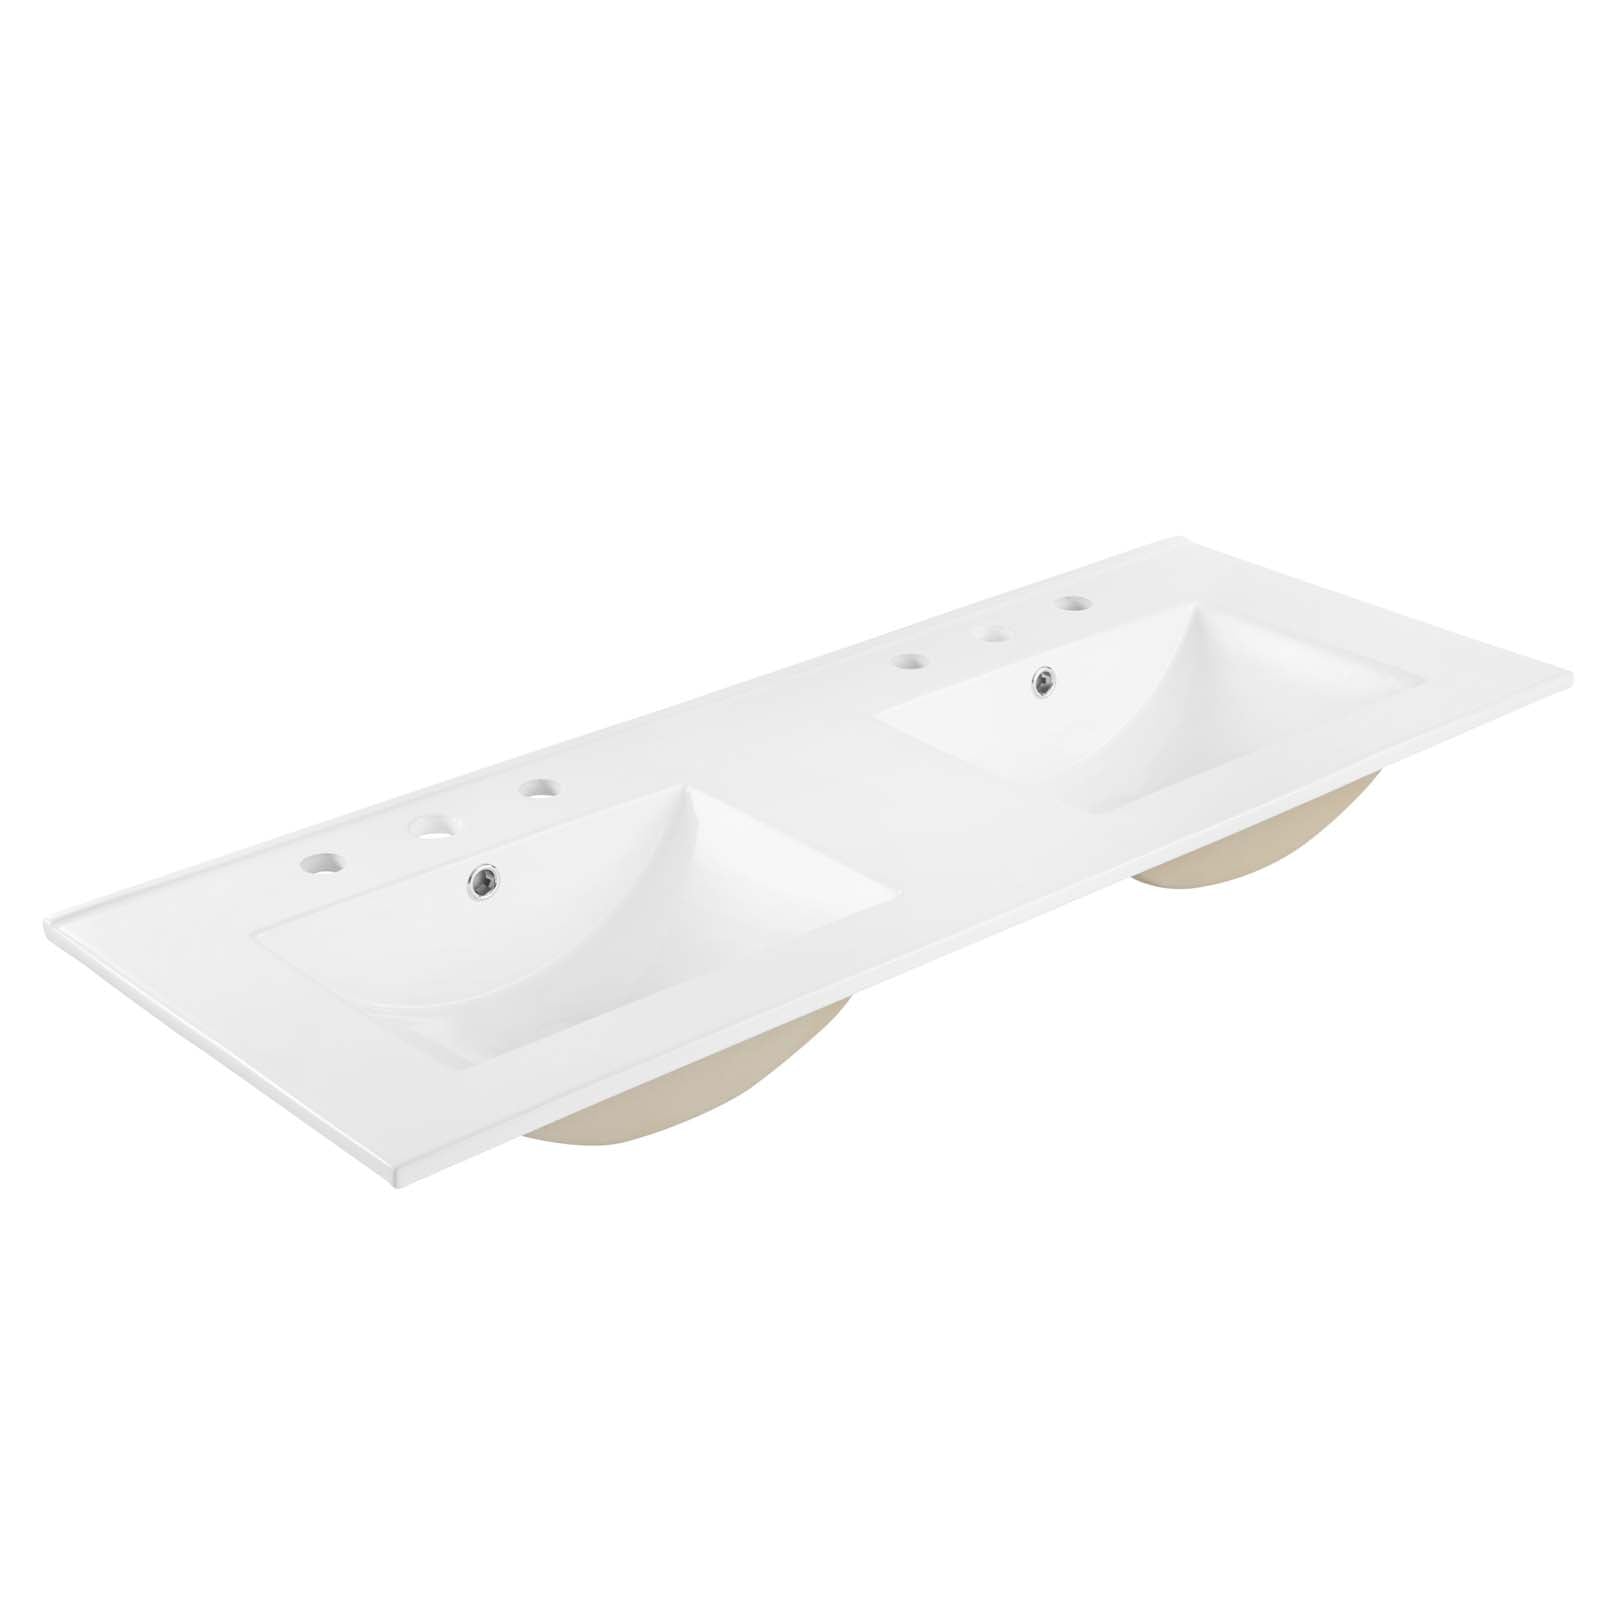 Steamforge 48" Double Sink Bathroom Vanity By Modway - EEI-6421 | Bathroom Accessories | Modway - 9